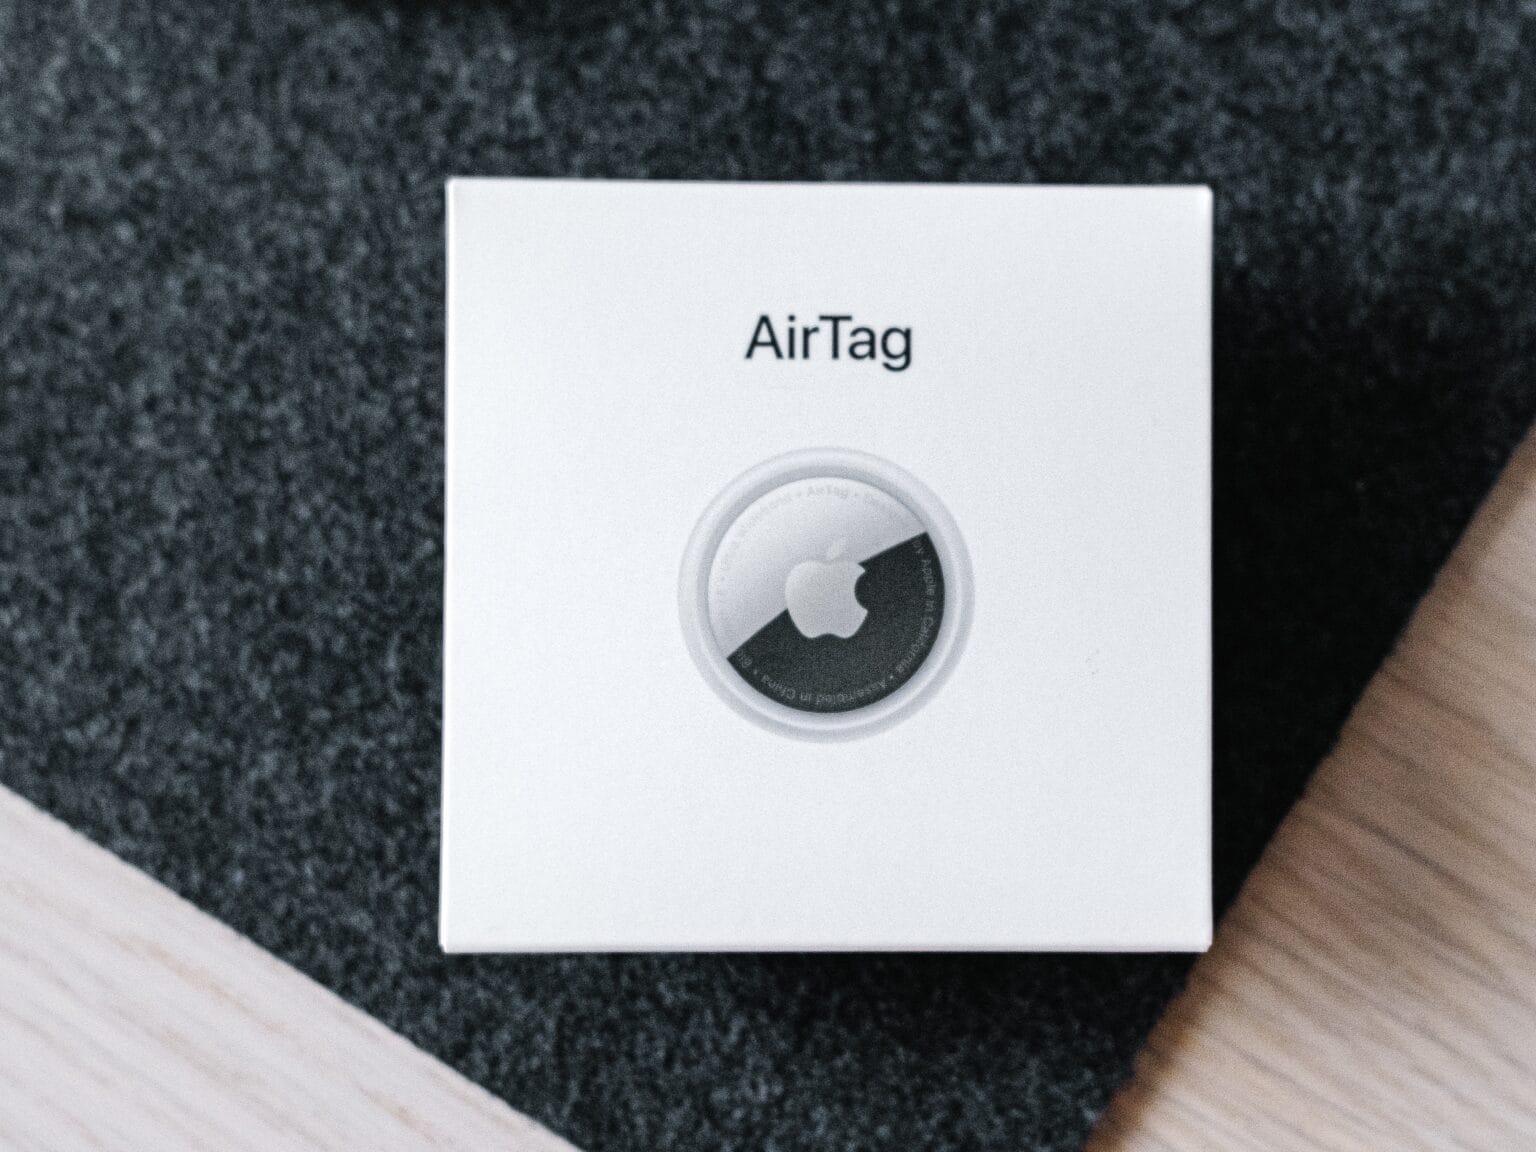 Grab AirTag at its lowest price yet